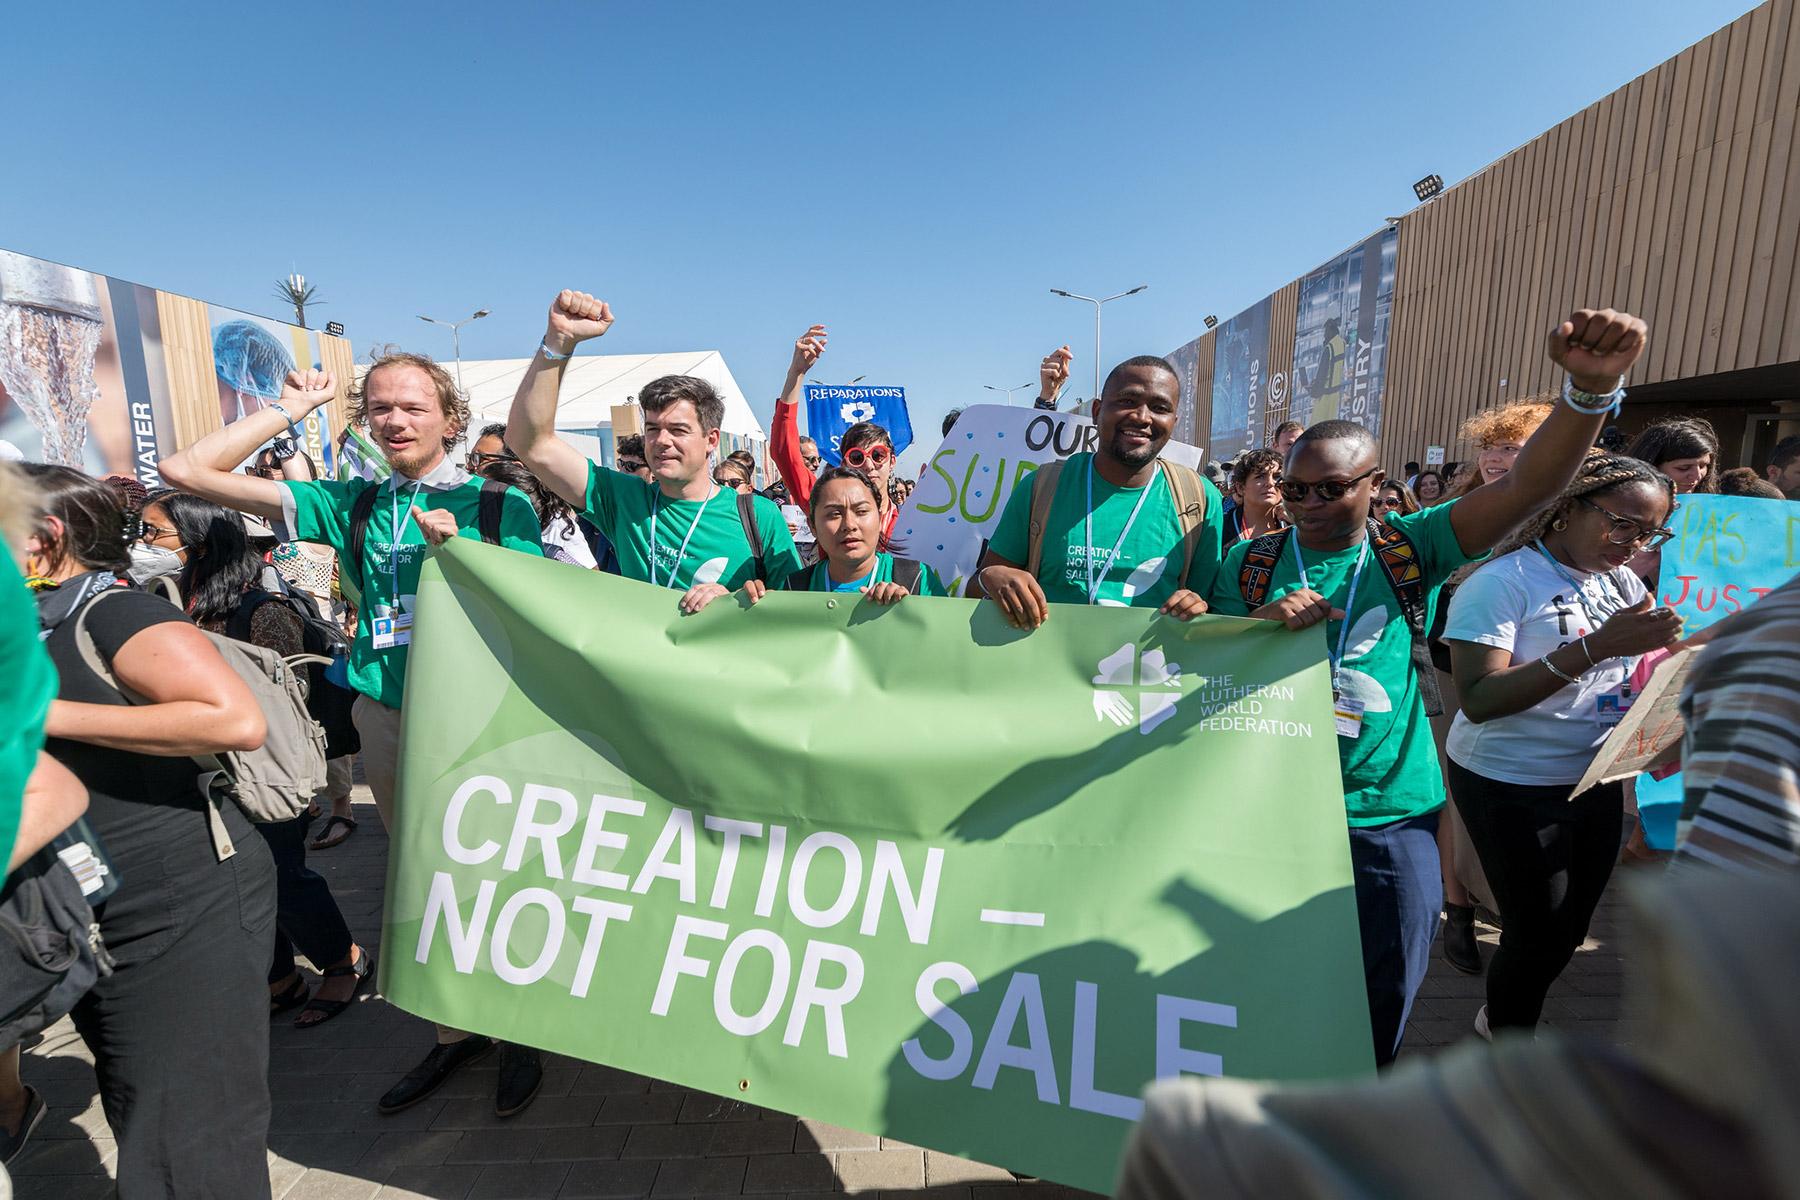 Young delegates from the Lutheran World Federation join hundreds of people from civil society organizations and faith communities across the globe to march through the venue of the United Nations climate change conference COP27 in Sharm el-Sheikh, Egypt, calling for climate justice and urgent action. Photo: LWF/Albin Hillert